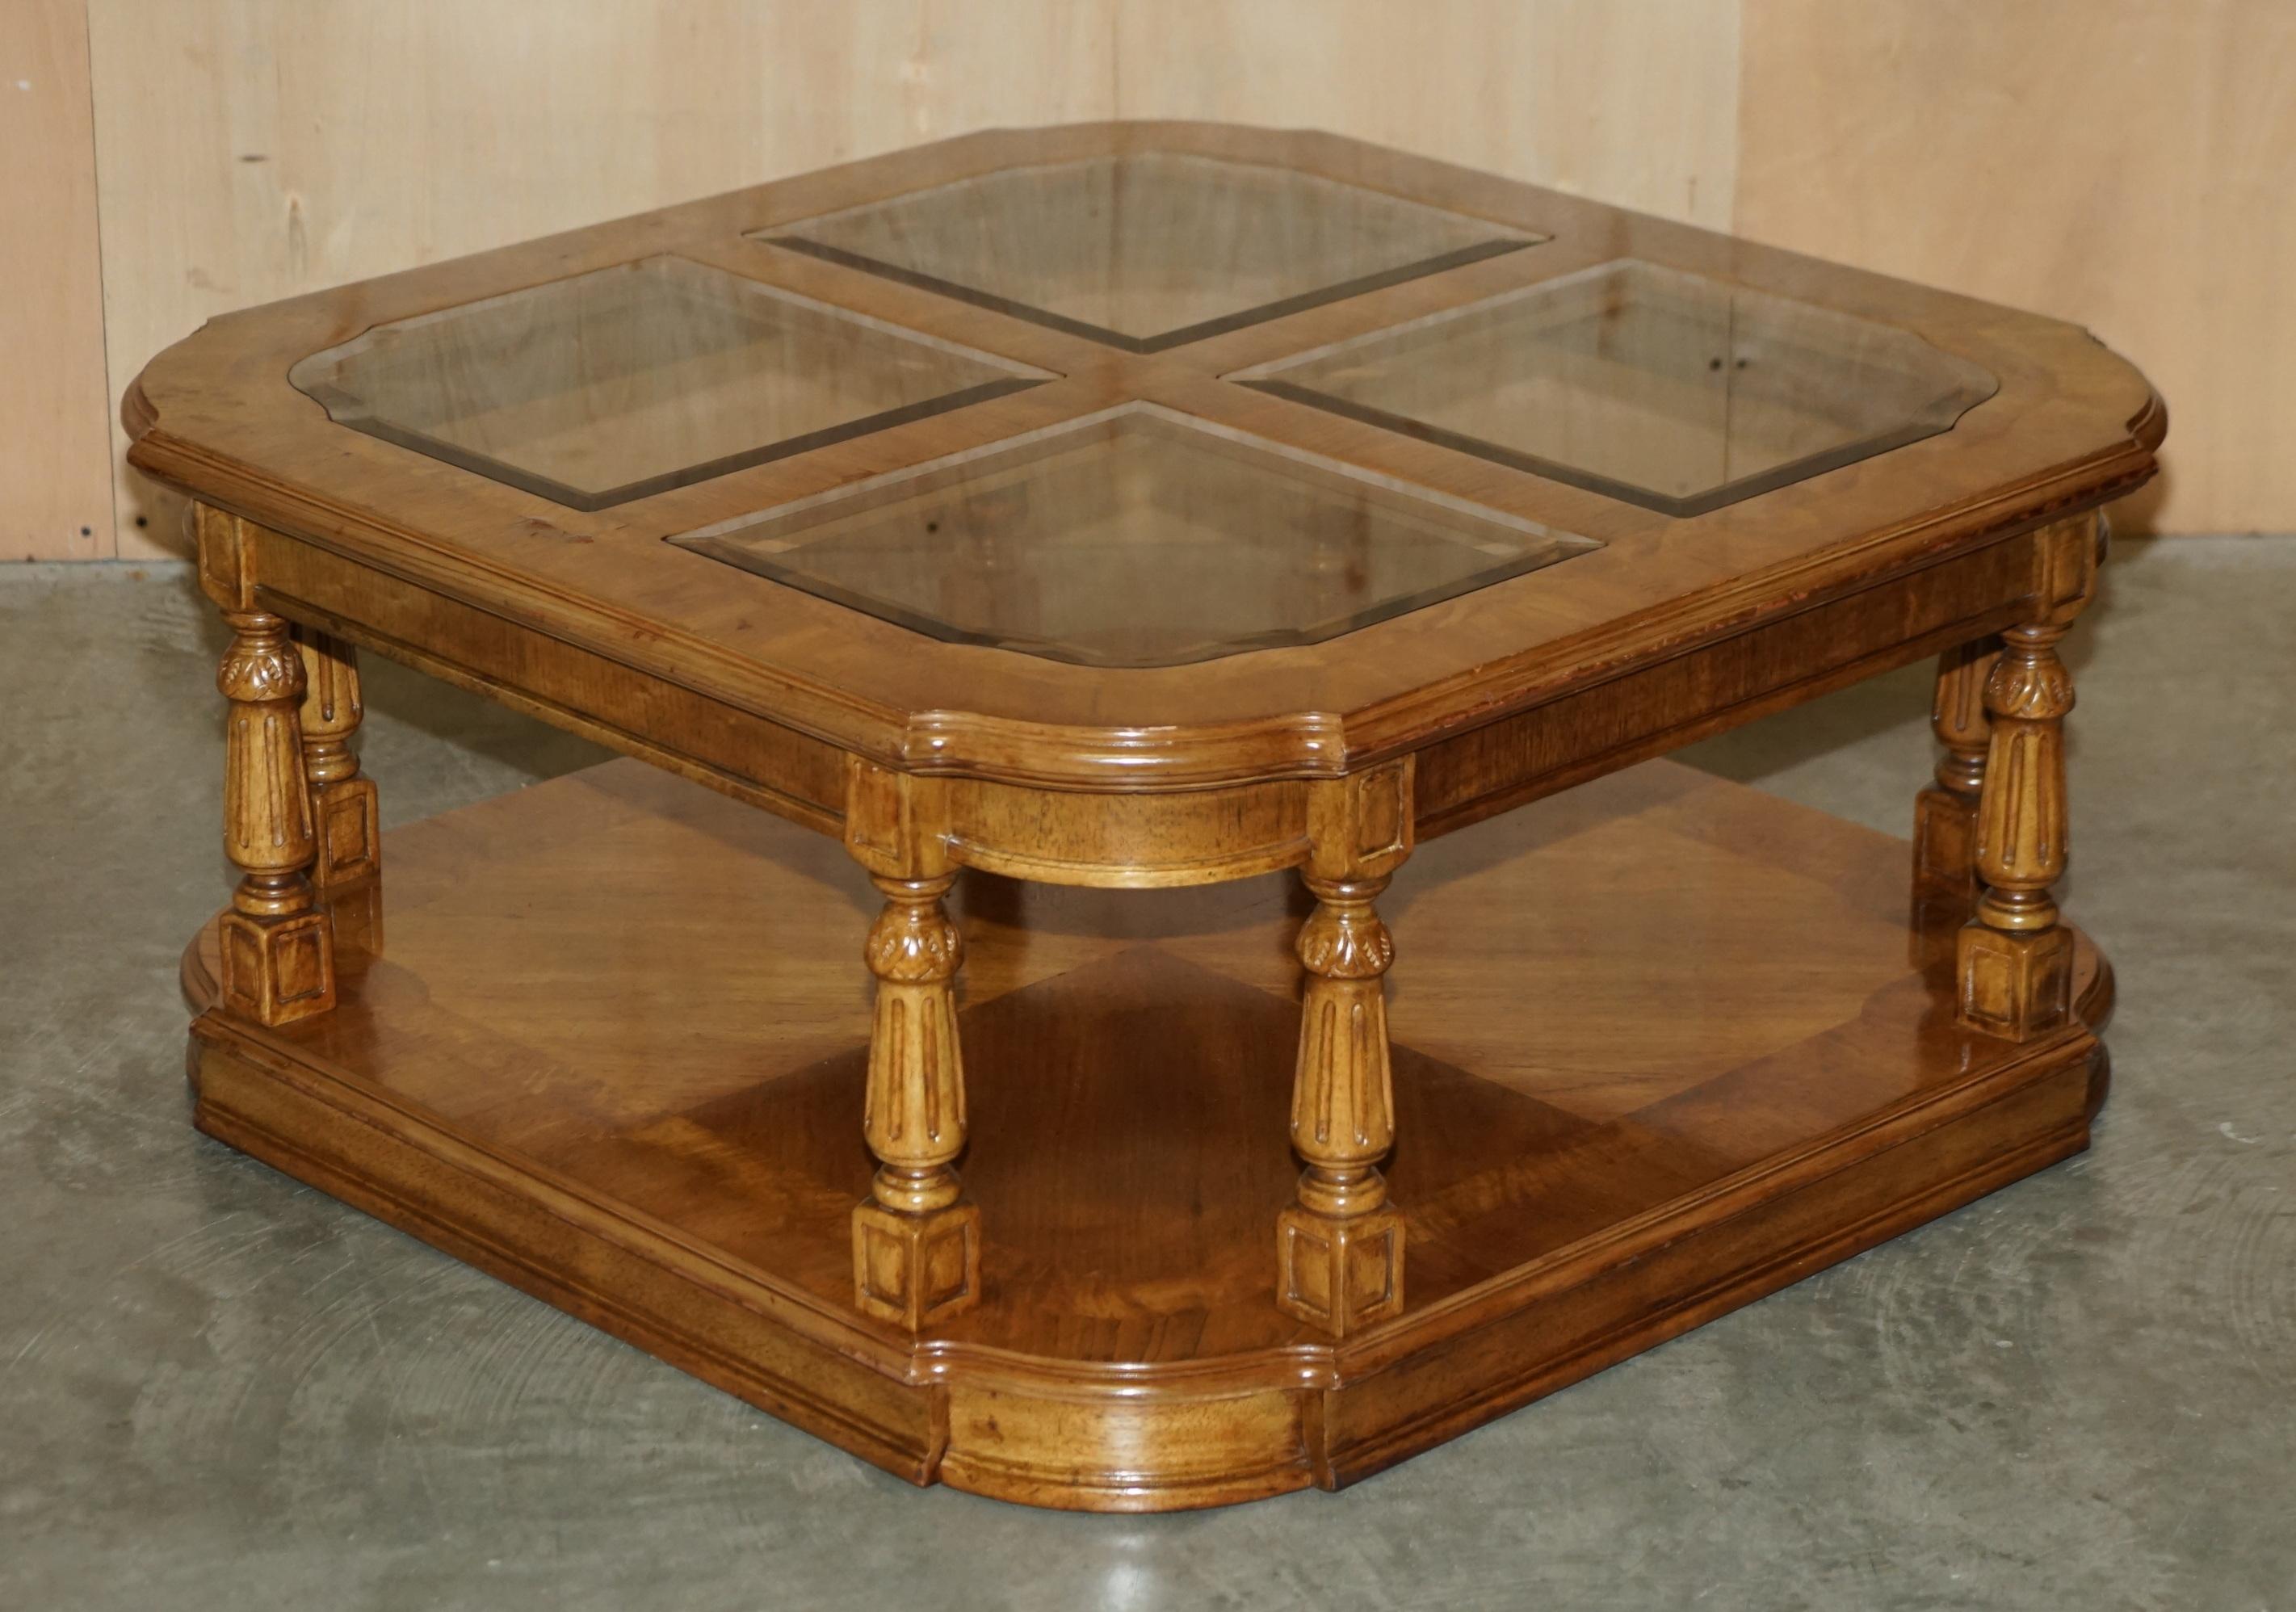 We are delighted to offer for sale this stunning glass topped burr walnut coffee or cocktail table which is part of a suite.

A good looking well made and decorative piece, the timber patina is sublime, the tops have heavy bevelled glass inserts